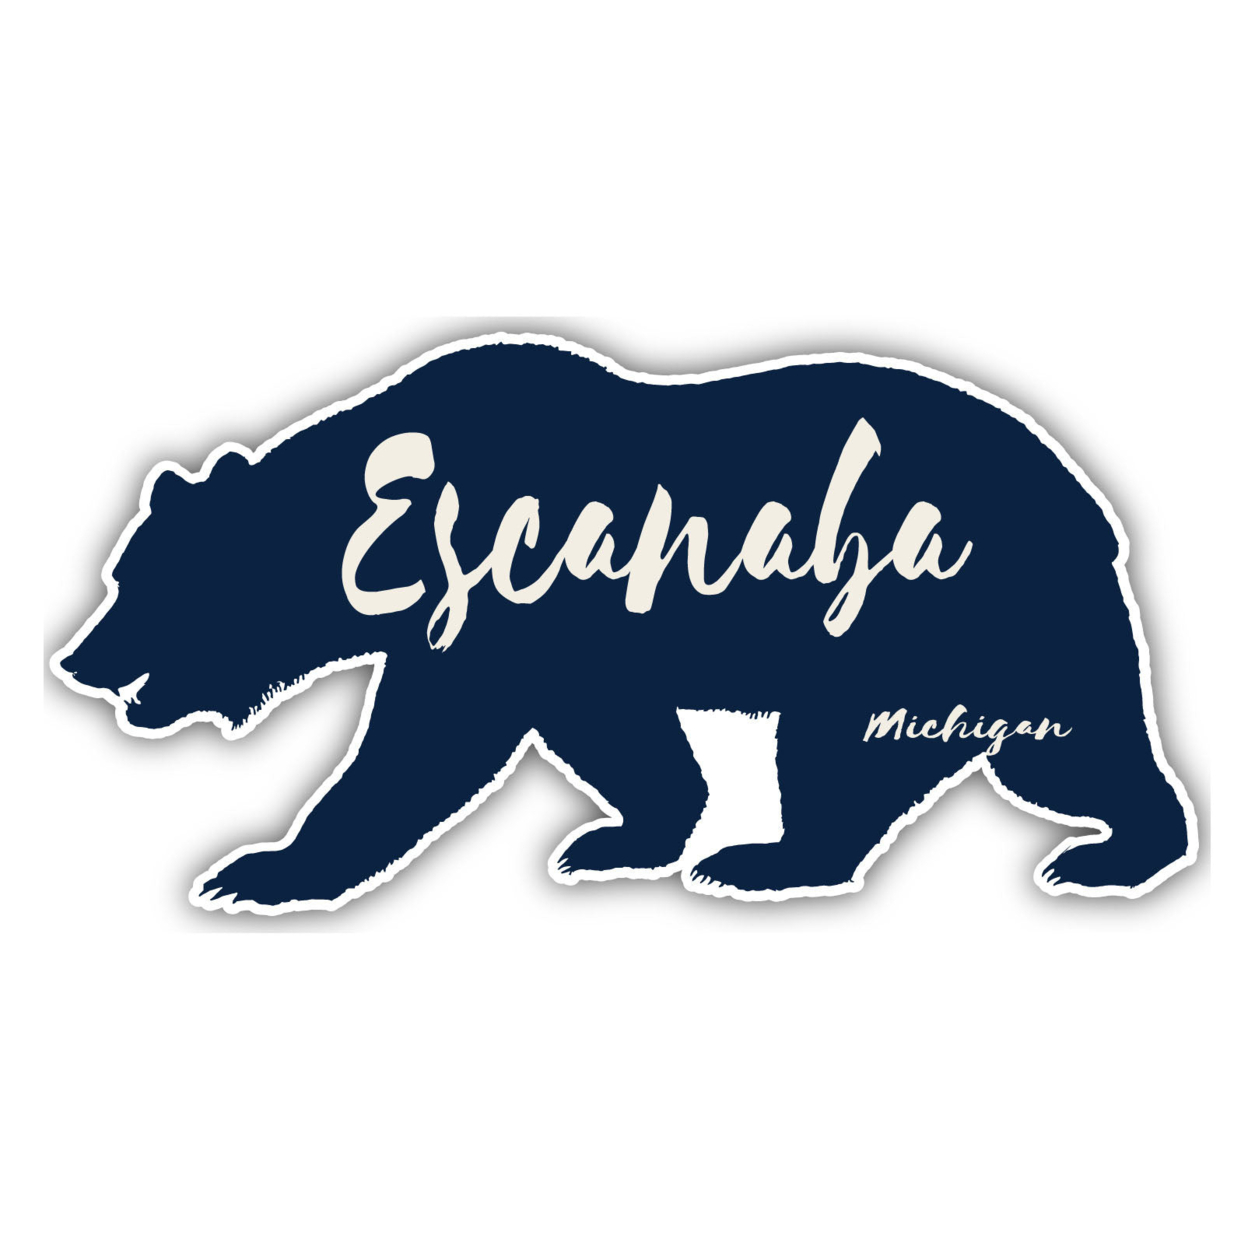 Escanaba Michigan Souvenir Decorative Stickers (Choose Theme And Size) - 4-Pack, 4-Inch, Bear